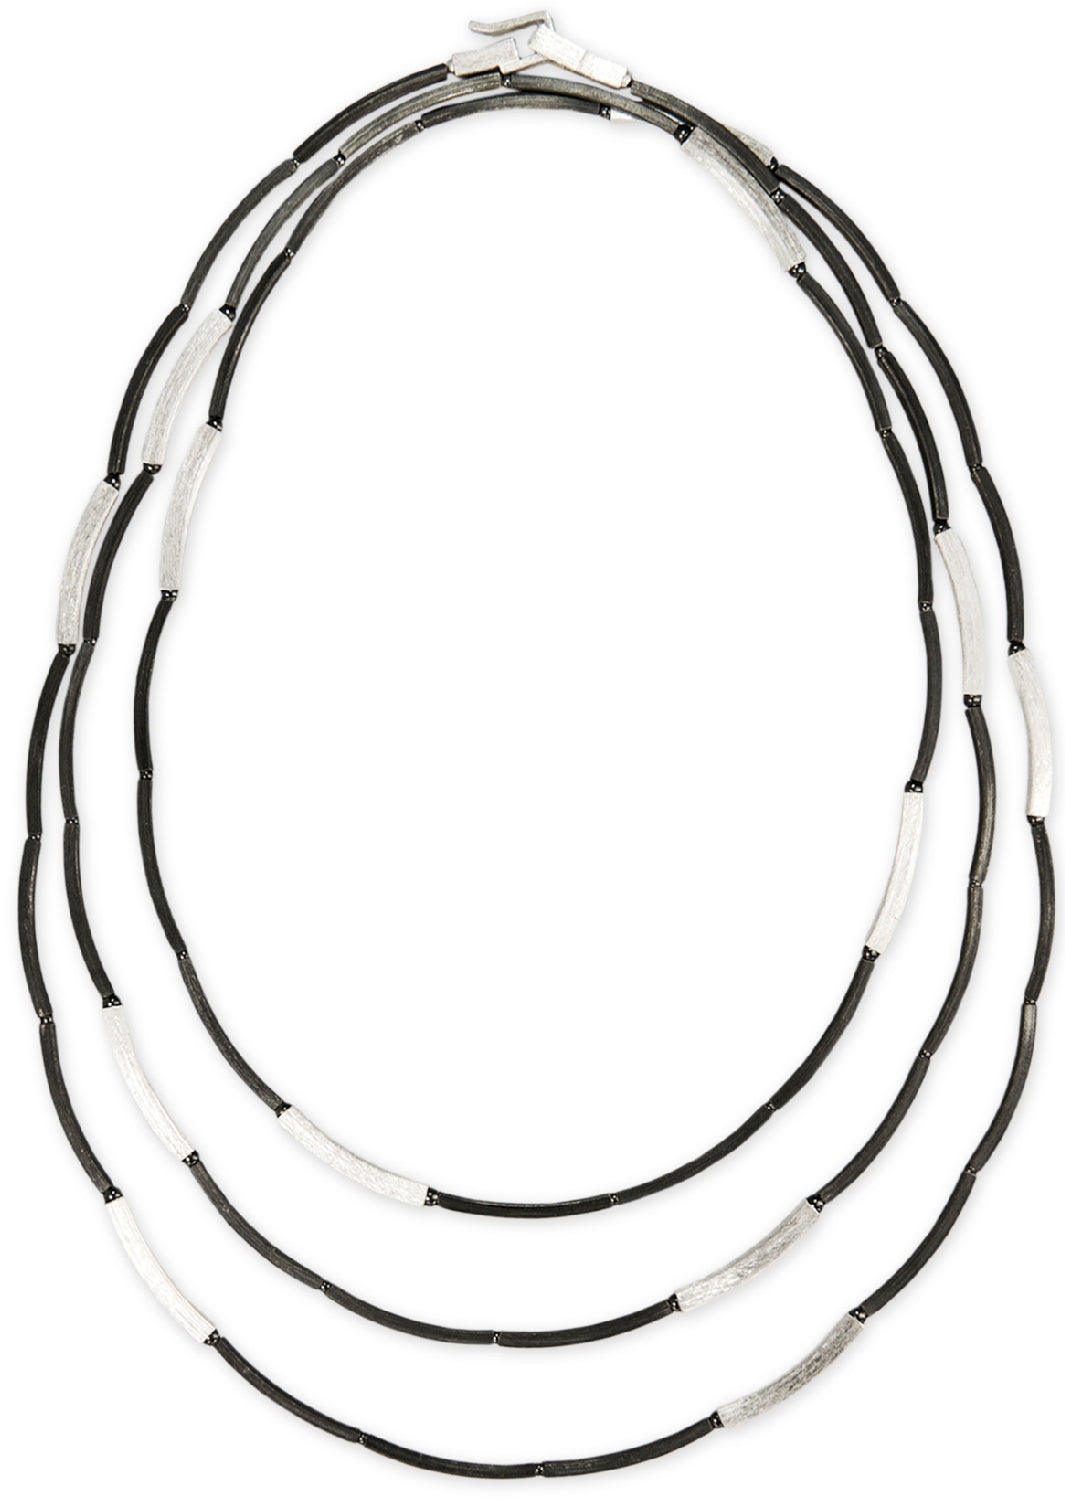 Mysterium Collection Long Sterling & Oxidized Tube Necklace